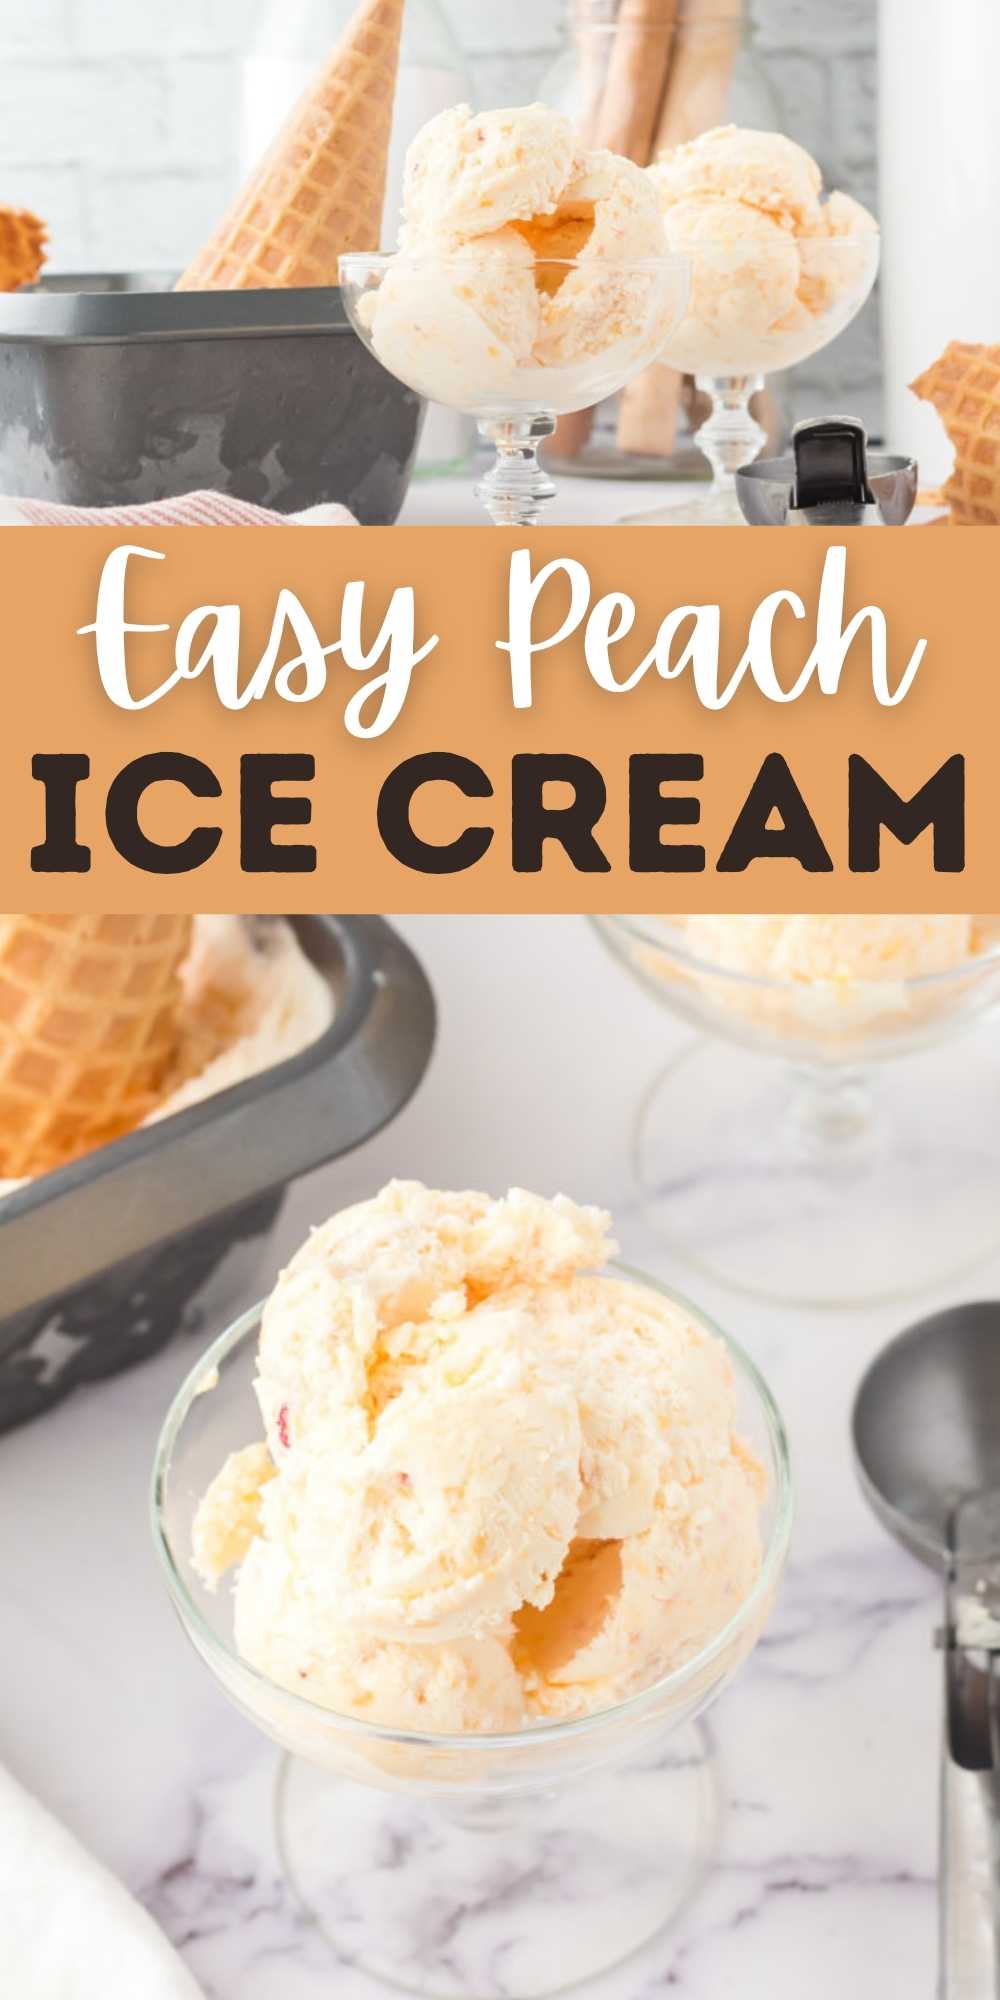 If you love peaches, you are going to love this easy no churn peach ice cream recipe!  This easy to make homemade ice cream recipe is only 4 ingredients and super simple to make with no eggs!  This peach ice cream is the perfect summer dessert recipe.  #eaatingonadime #icecreamrecipes #peachesrecipes #easydesserts 
